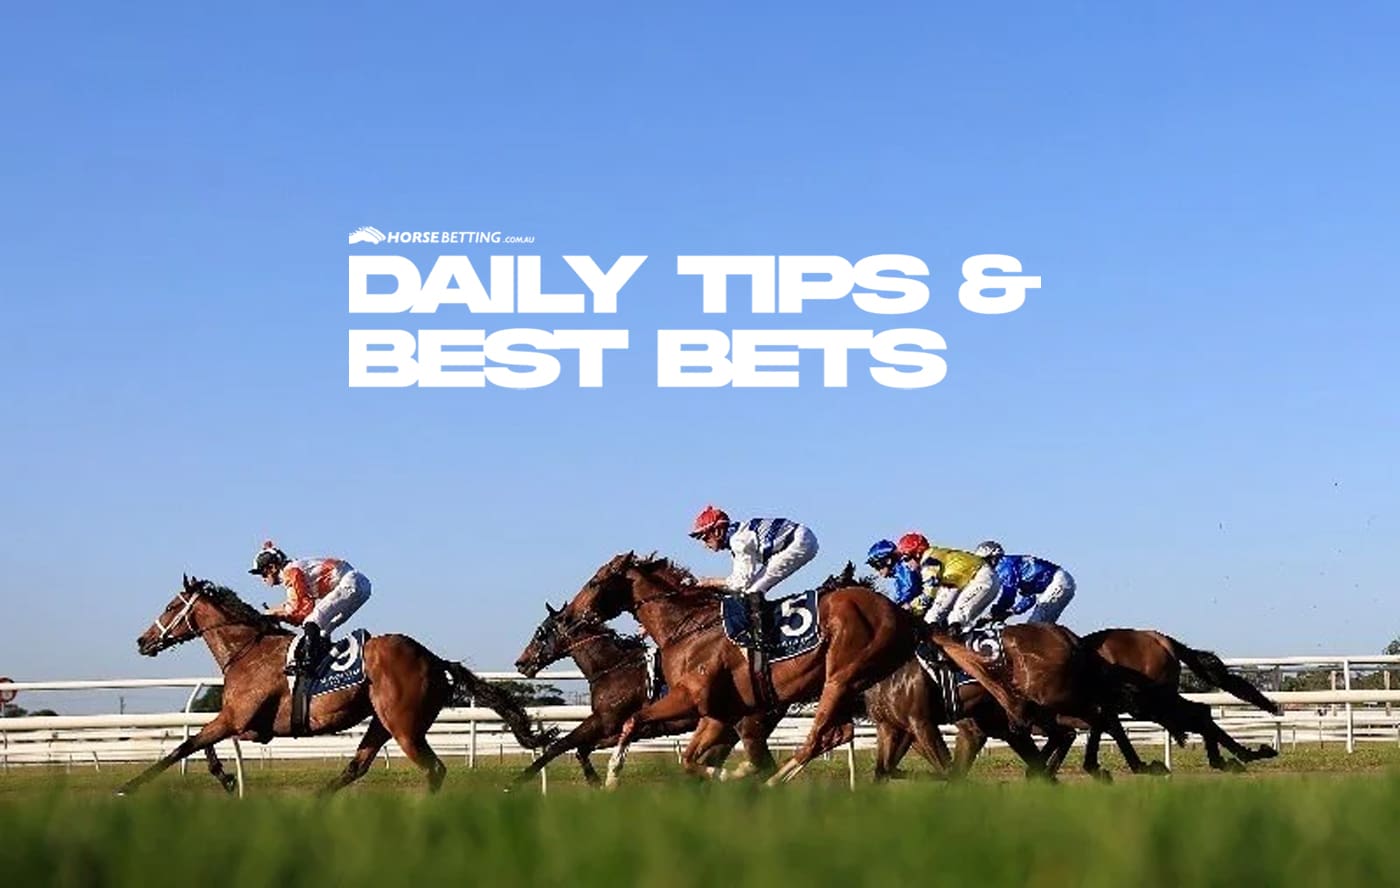 Muswellbrook free horse racing tips & best bets